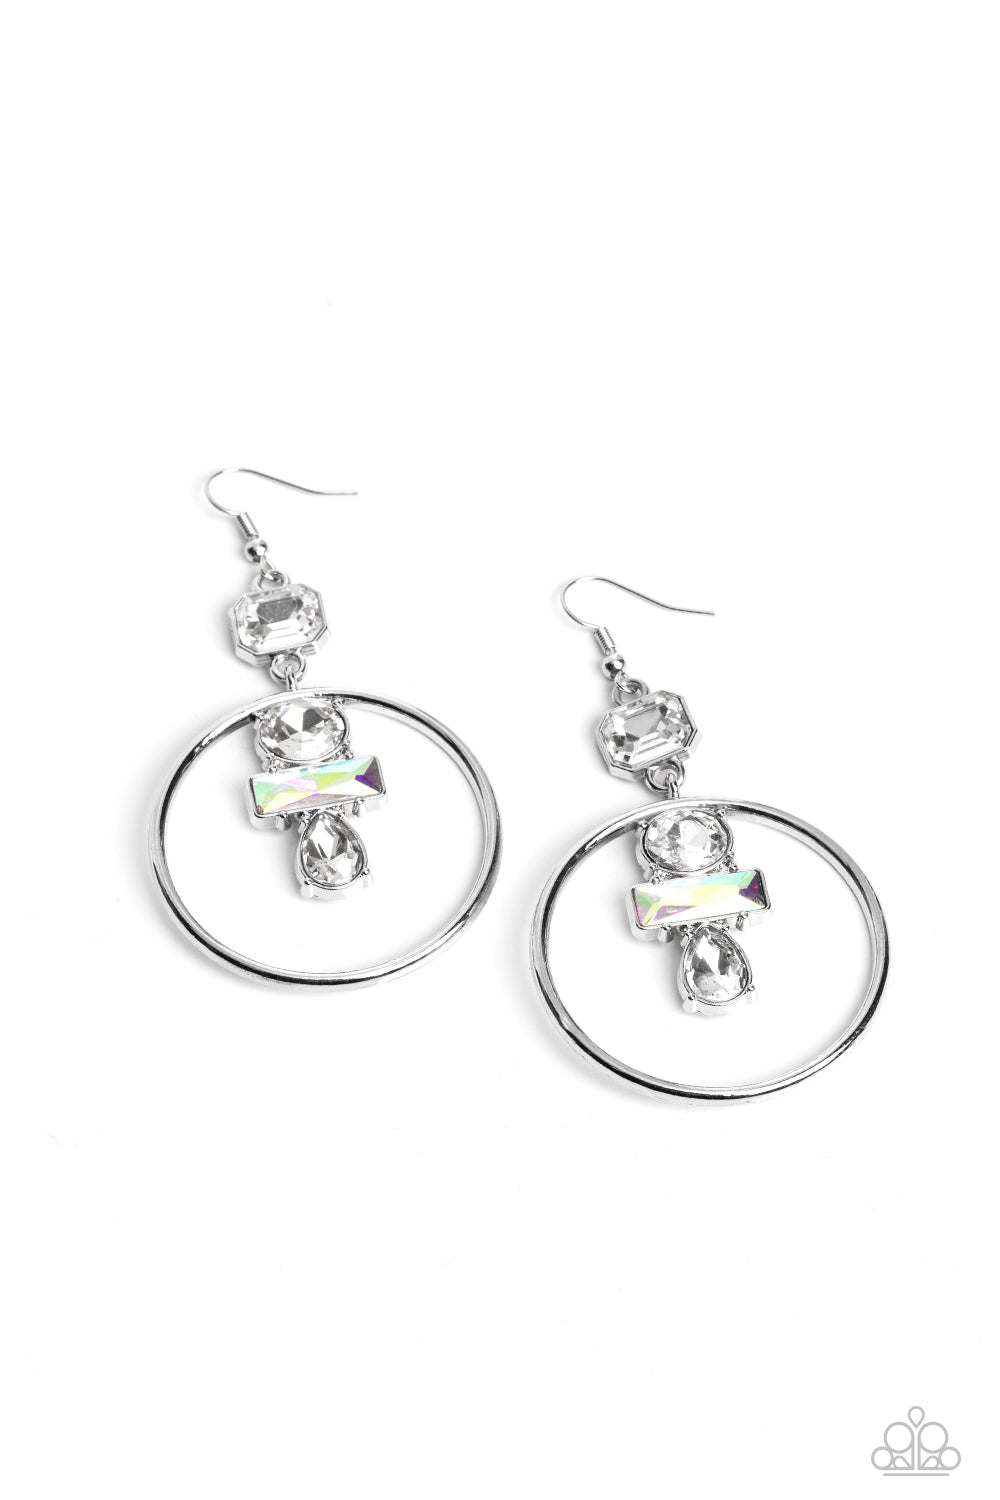 Paparazzi Accessories Geometric Glam - White Dangling from an asscher-cut white gem, a trio of white and iridescent geometric-shaped gems glimmer inside airy silver hoops. Earring attaches to a standard fishhook fitting. Due to its prismatic palette, colo